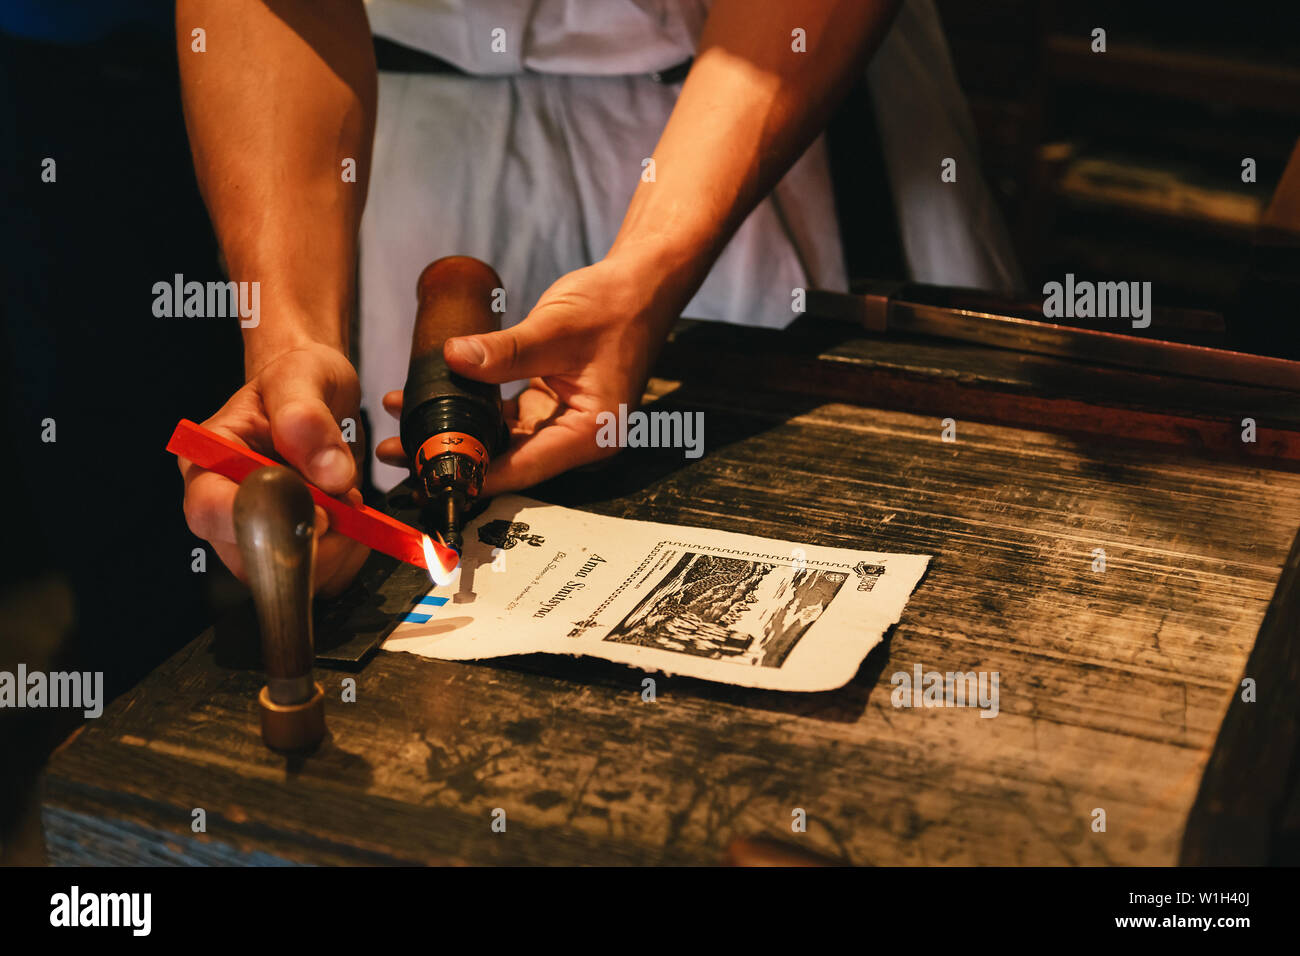 Bled, Slovenia - September, 8 2018: Close up of man's hands making a souvenir by himself, melting a red sealing wax candle with a burner to make a per Stock Photo